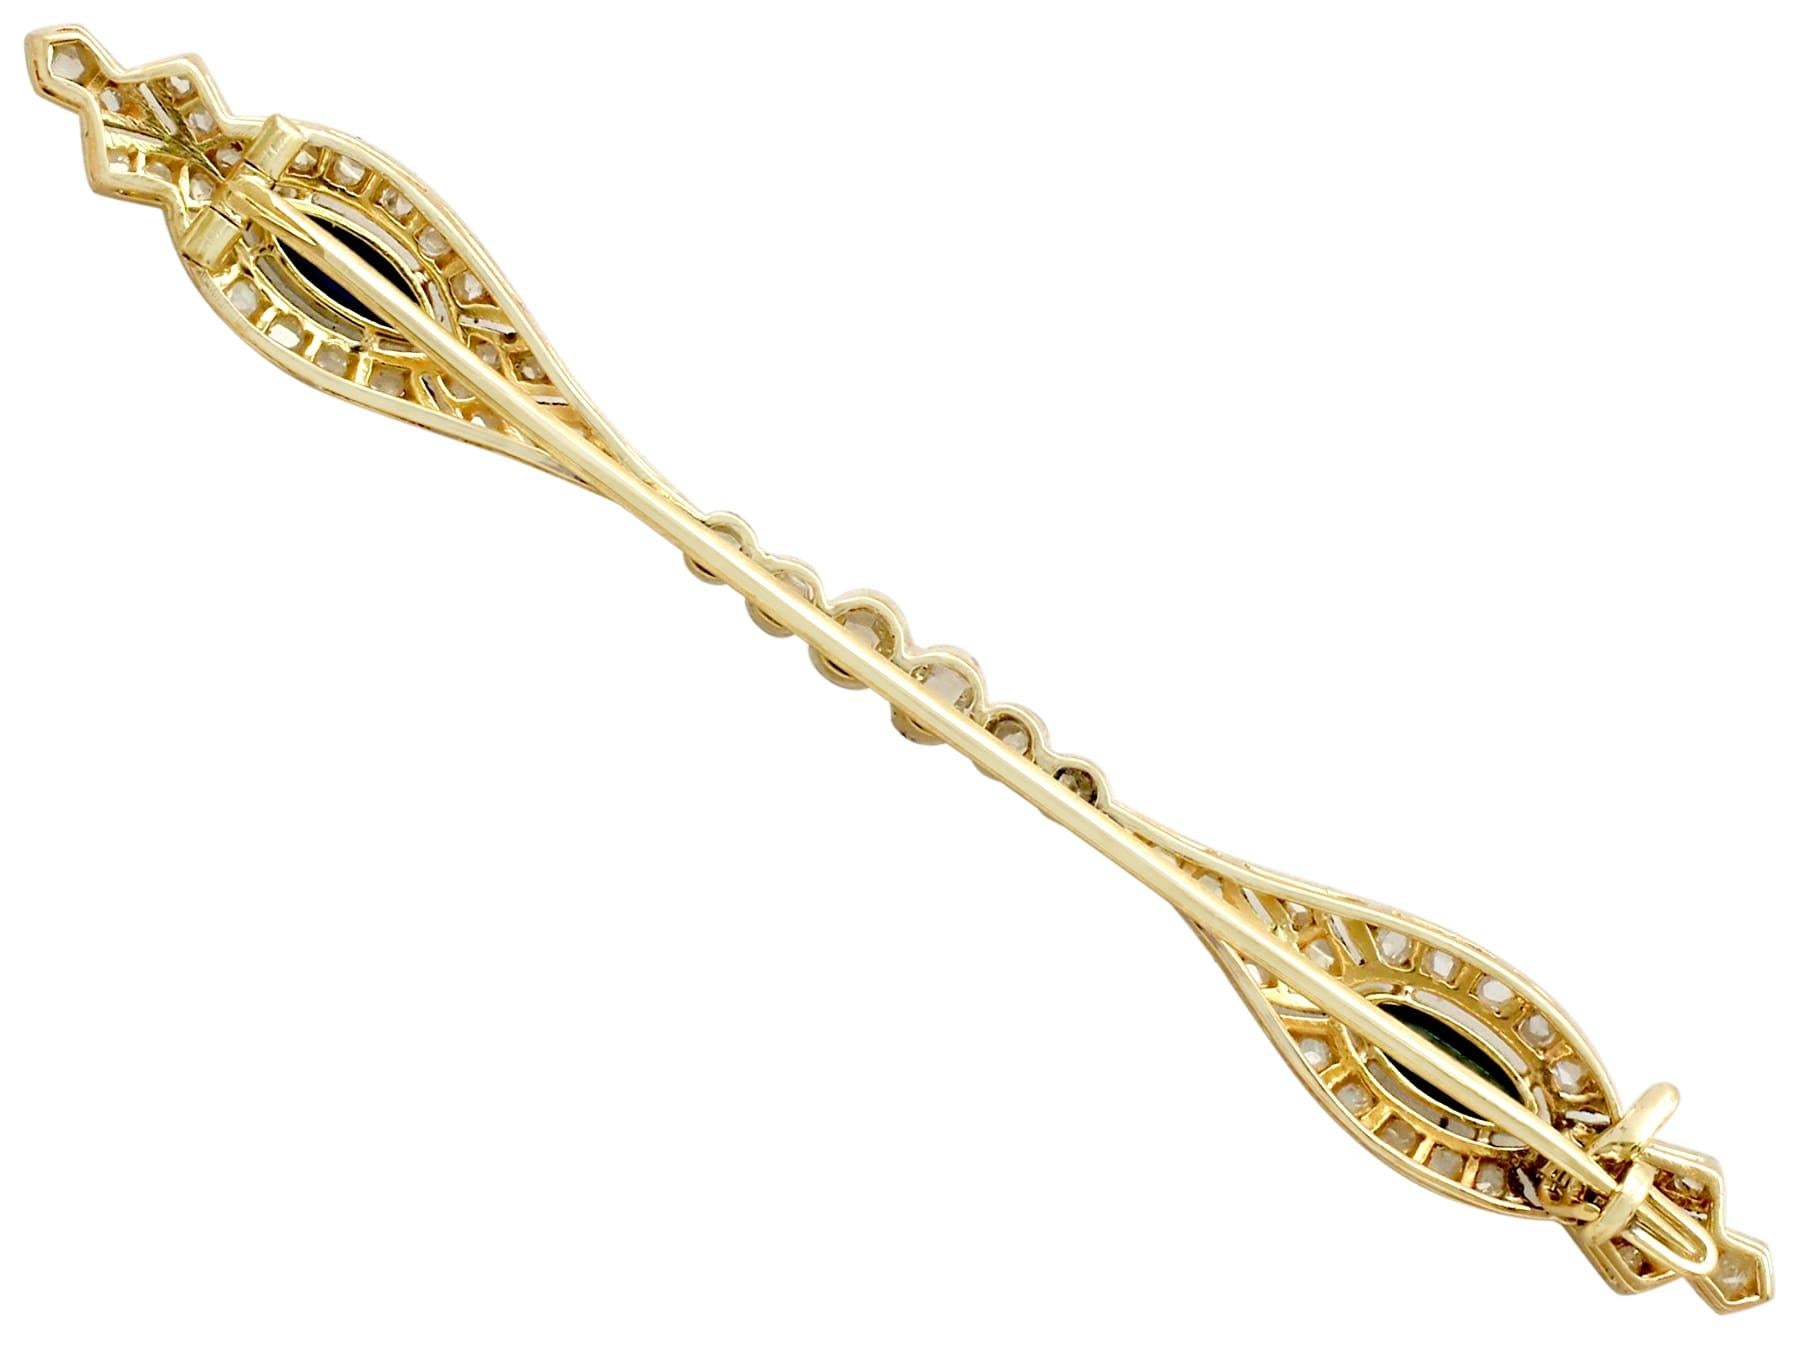 Marquise Cut Antique Sapphire and 1.19 Carat Diamond Yellow Gold Bar Brooch, Circa 1910 For Sale